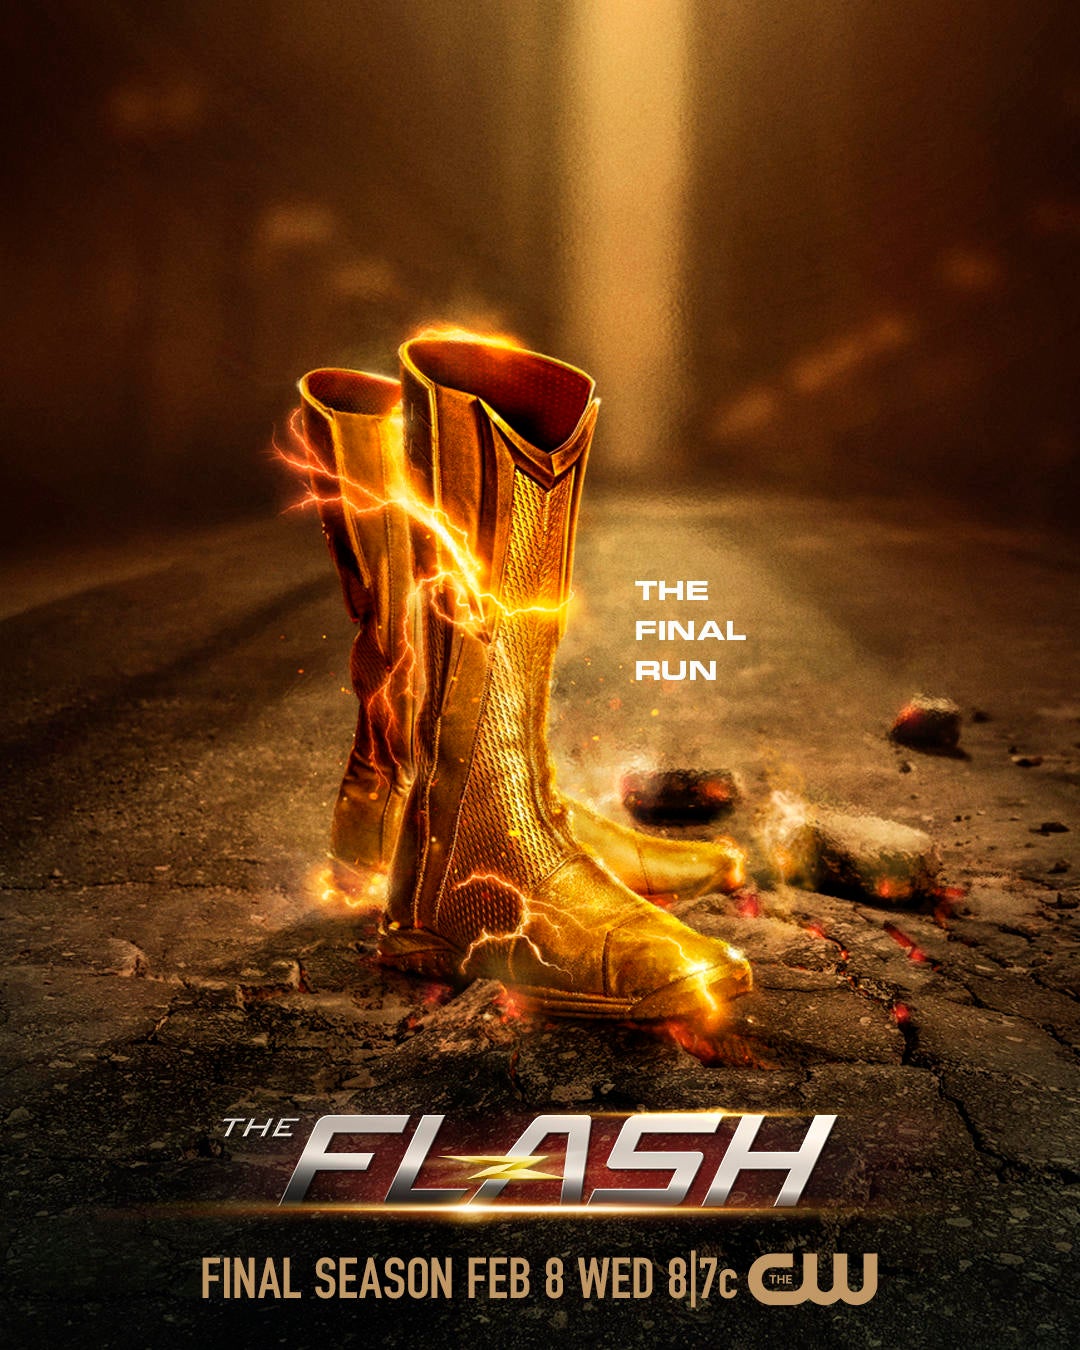 The Flash Teases One Last Run in Final Season Poster